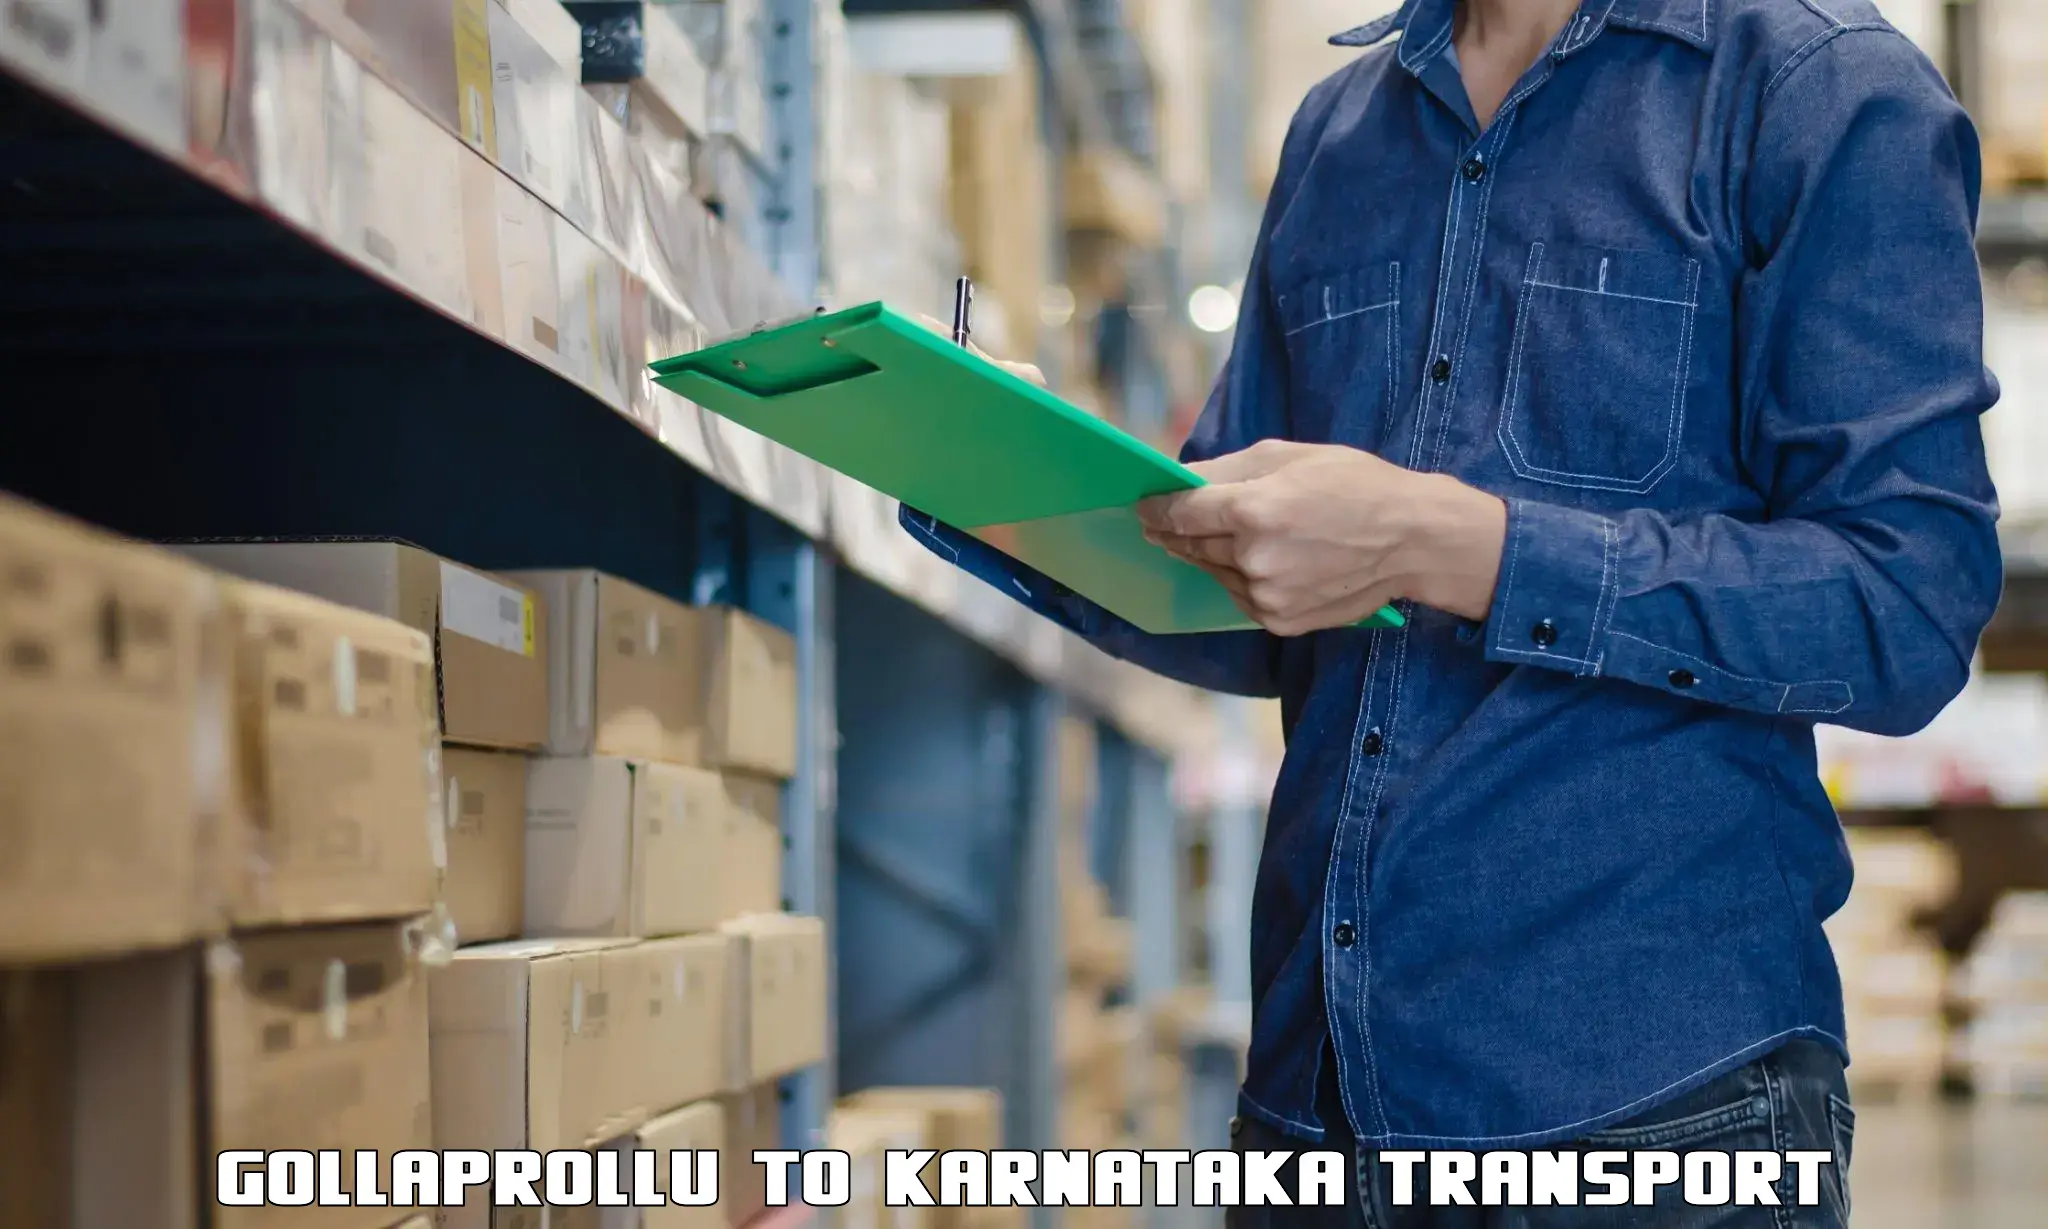 Domestic transport services Gollaprollu to Navalgund